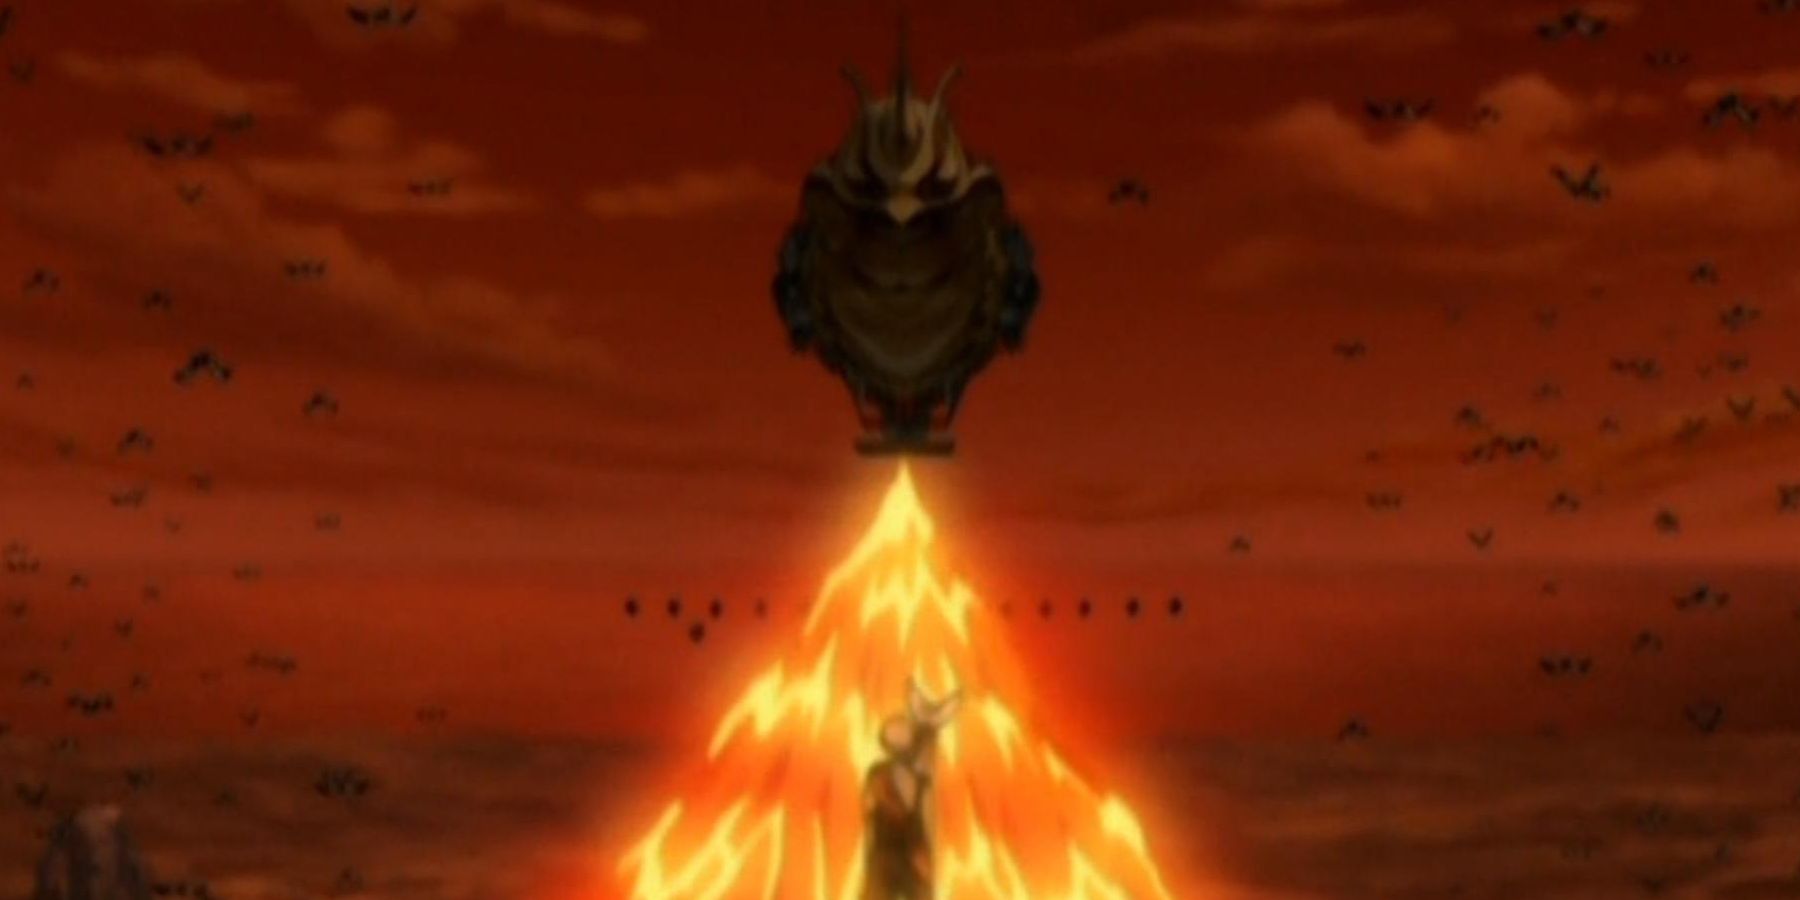 Aang facing Ozai, about to fight